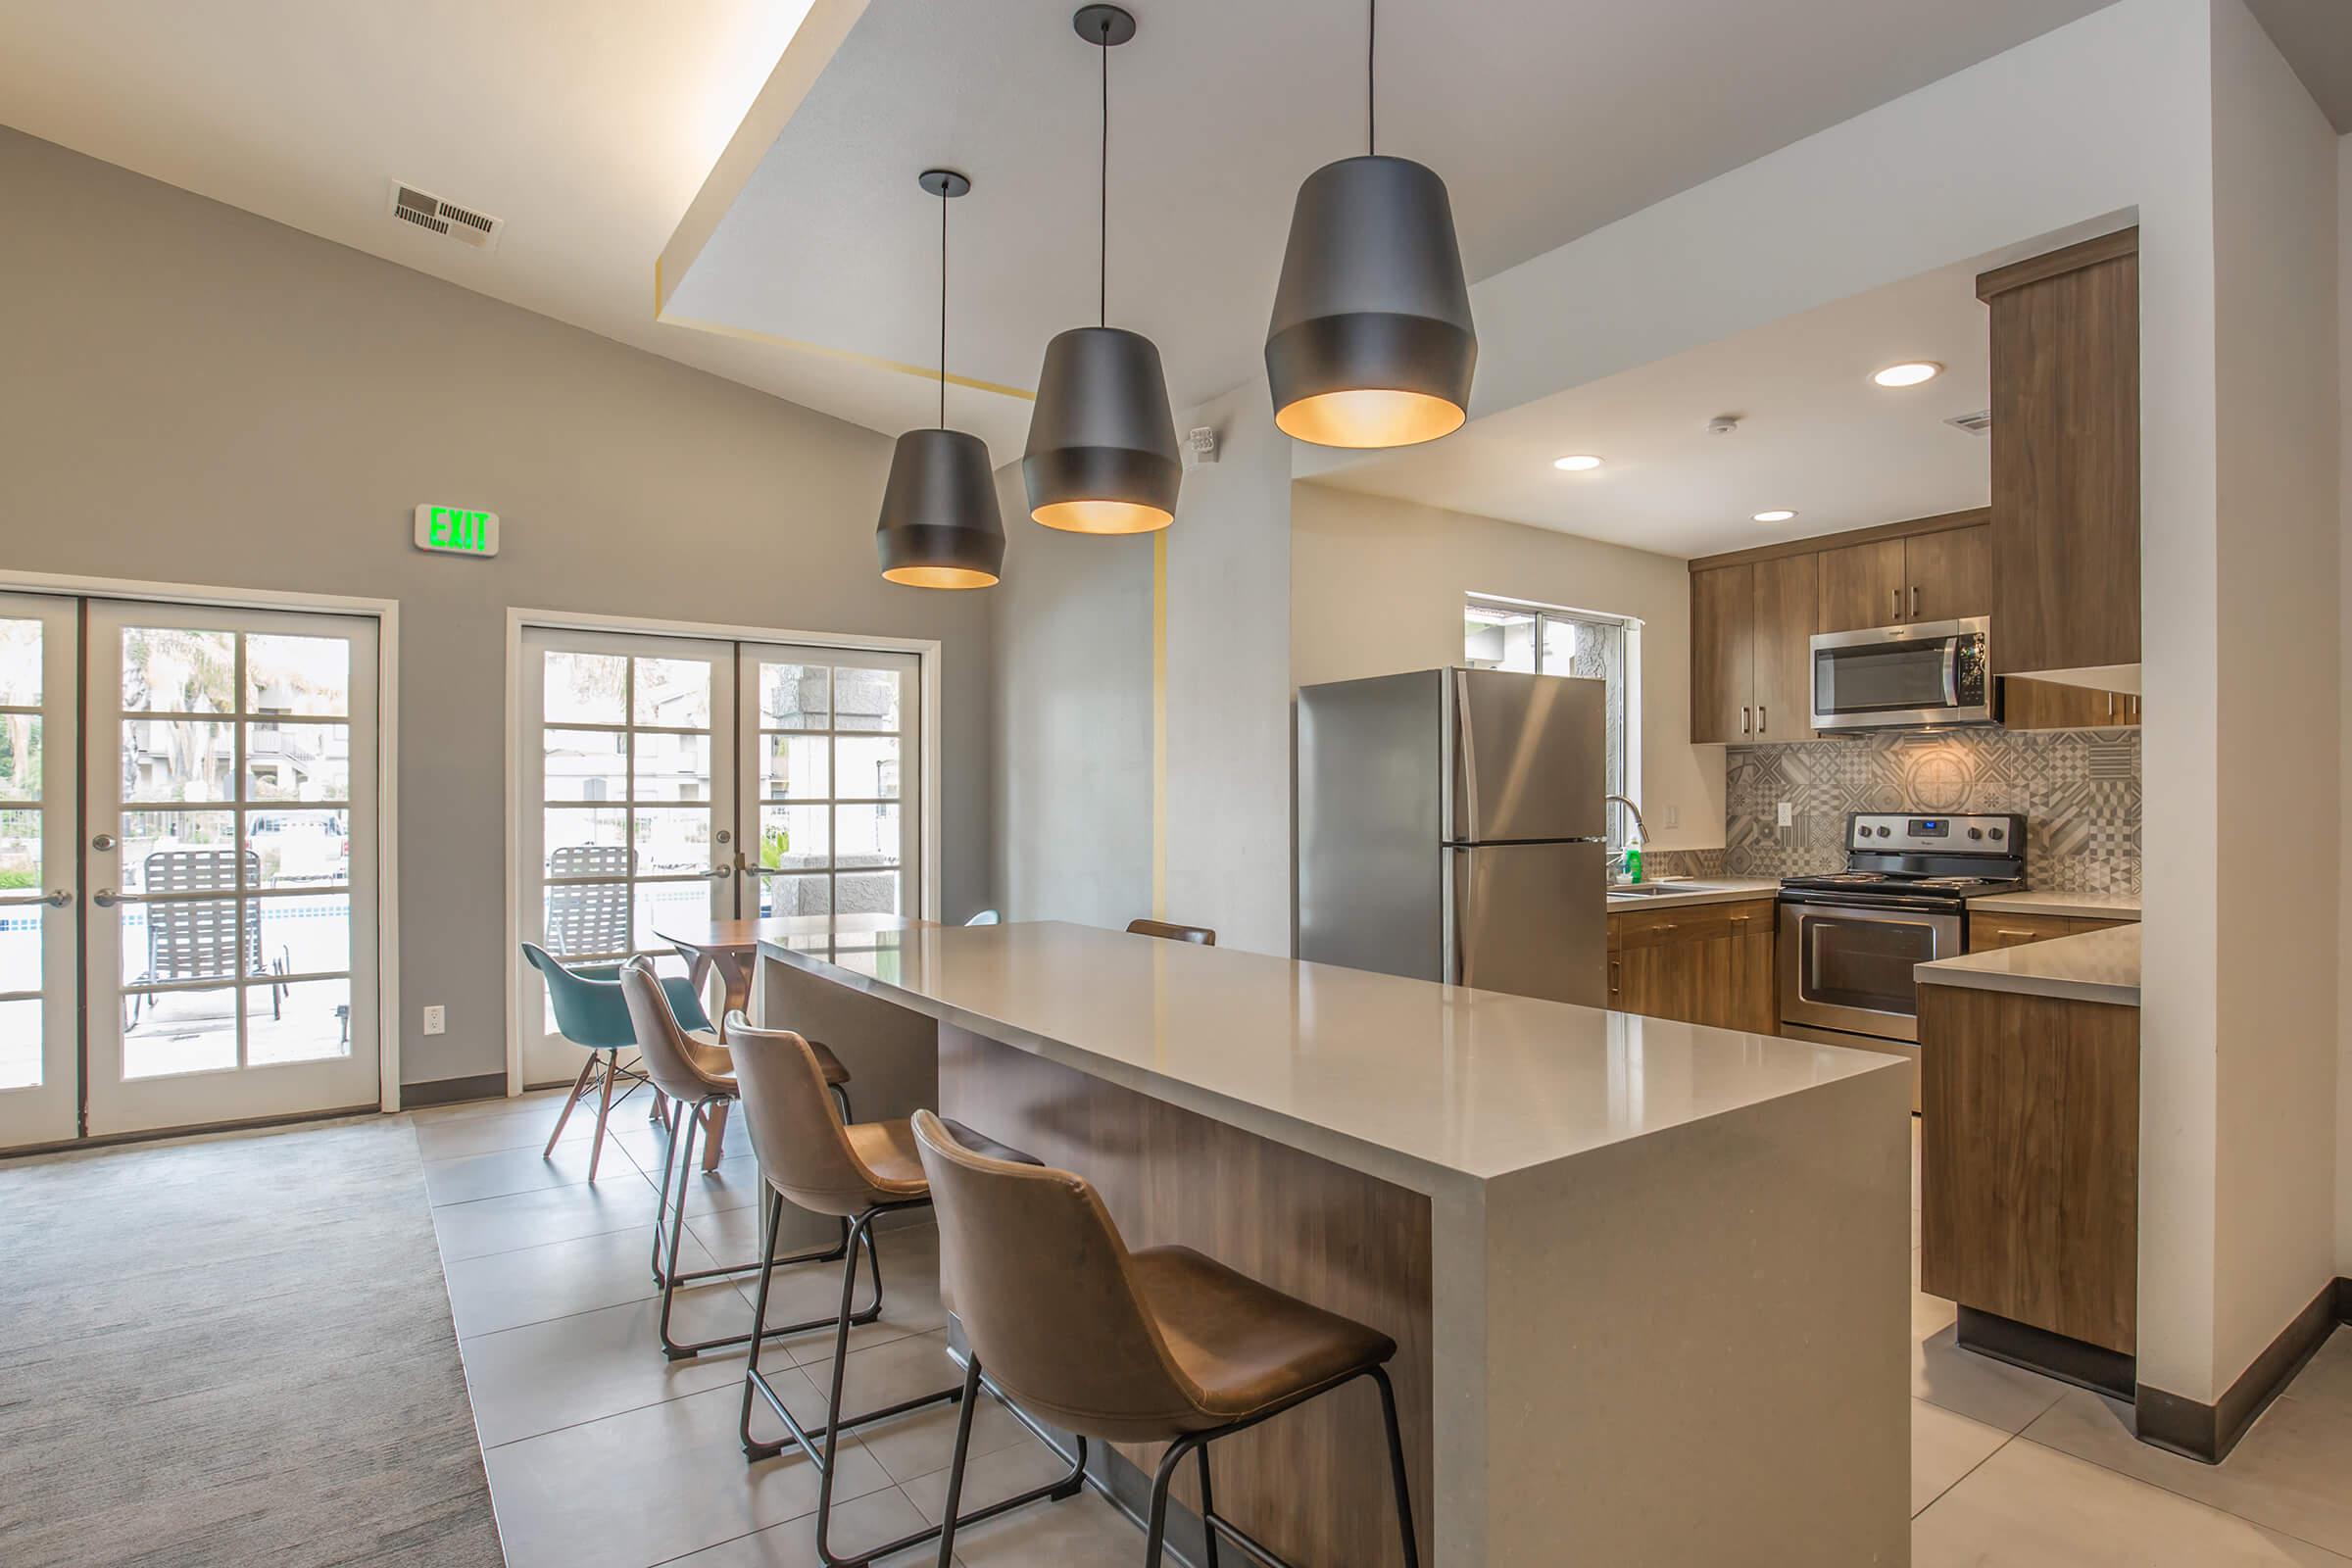 Community kitchen with stainless steel appliances